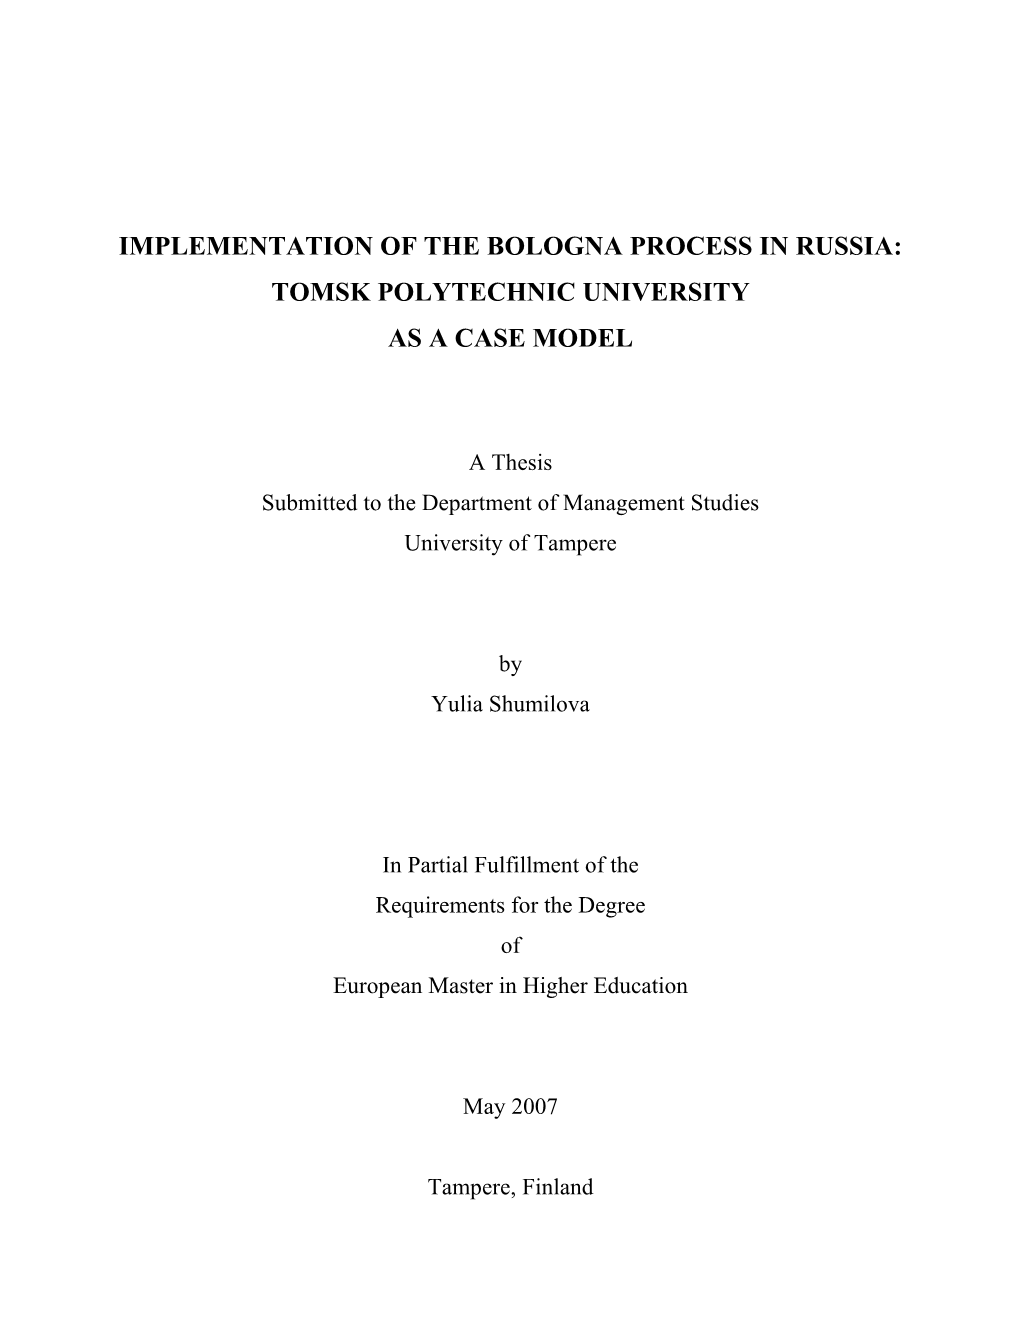 Implementation of the Bologna Process in Russia: Tomsk Polytechnic University As a Case Model